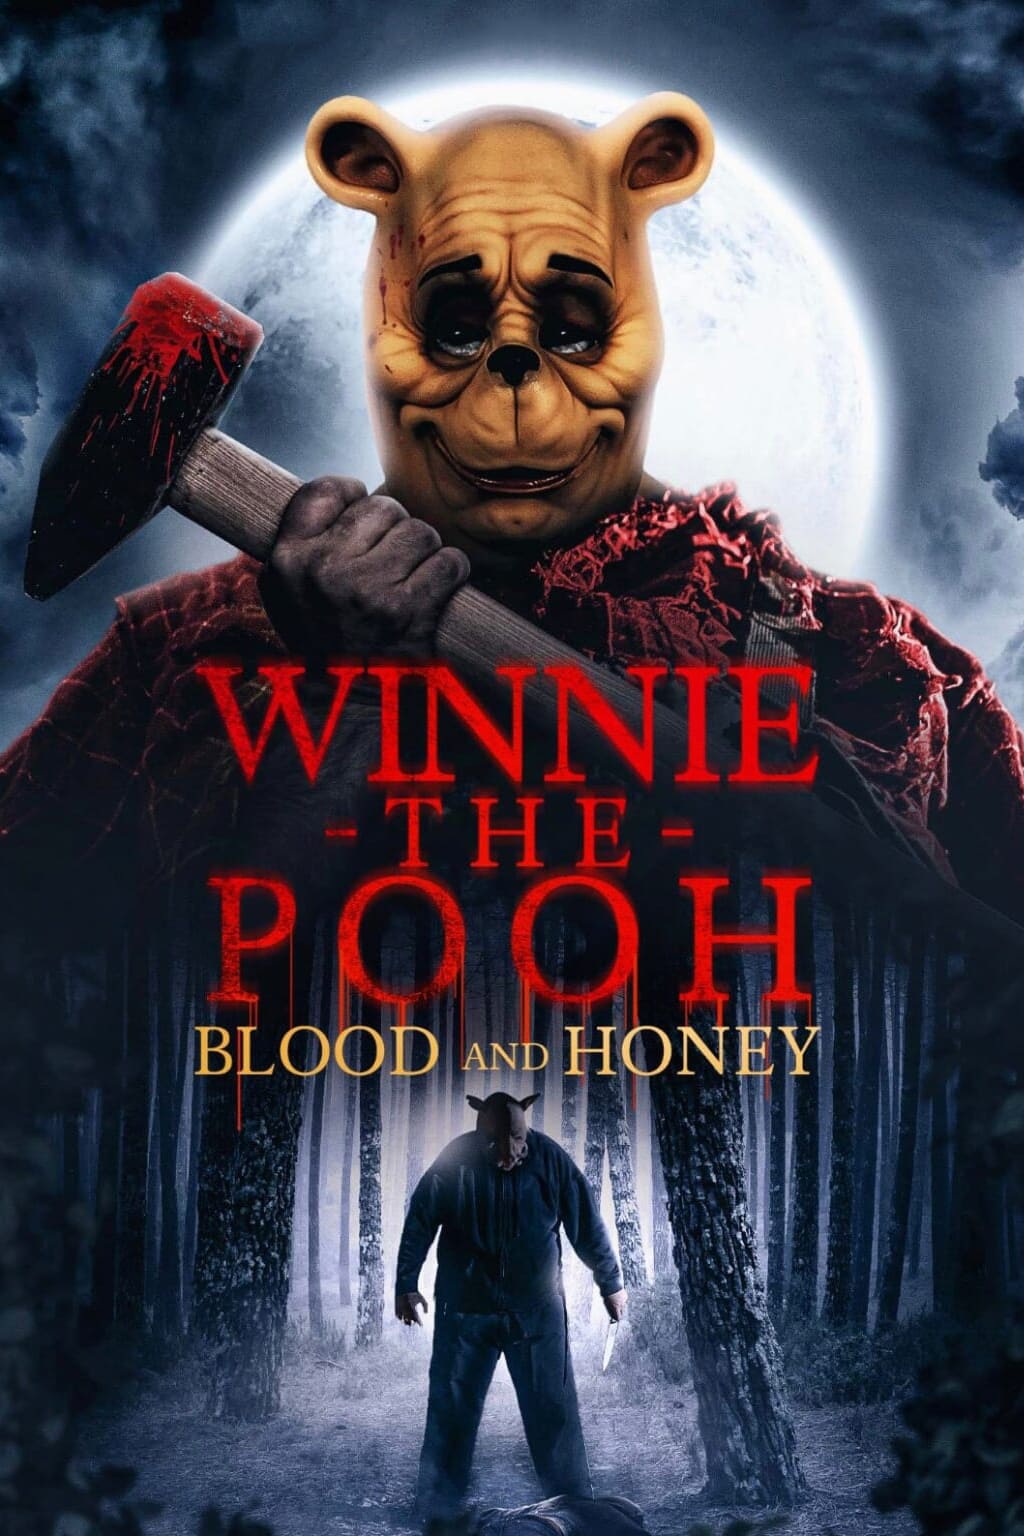 Poster for the movie "Winnie the Pooh: Blood and Honey"